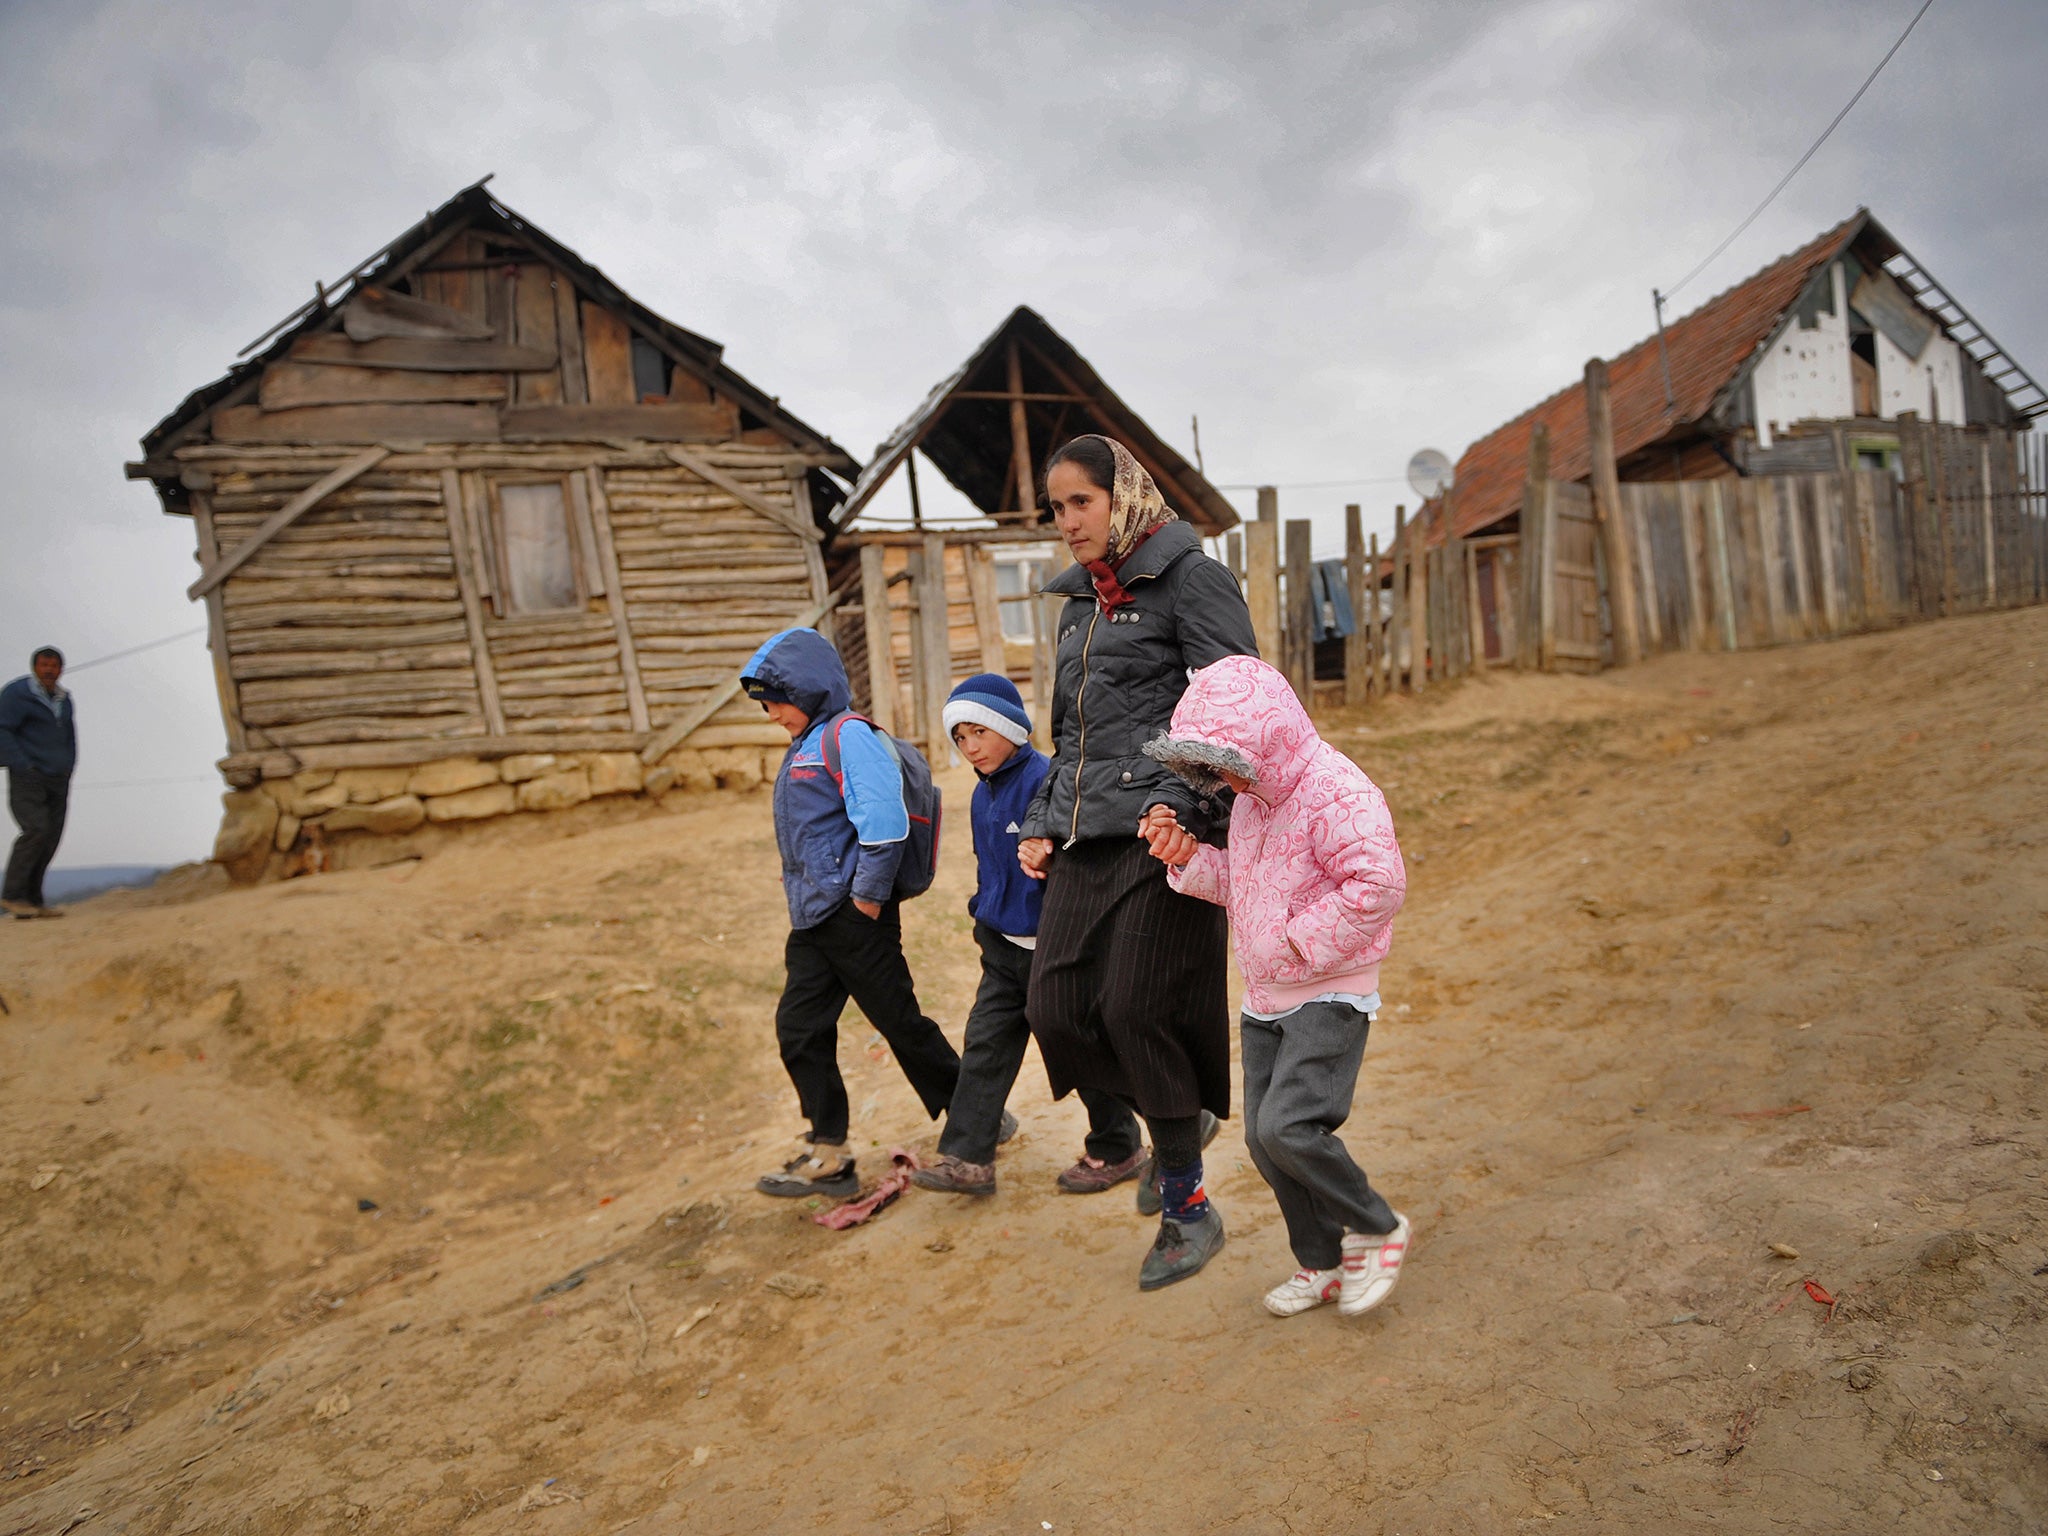 Poverty rates in Romania tend to be highest in rural areas, where 45% of the country’s population live